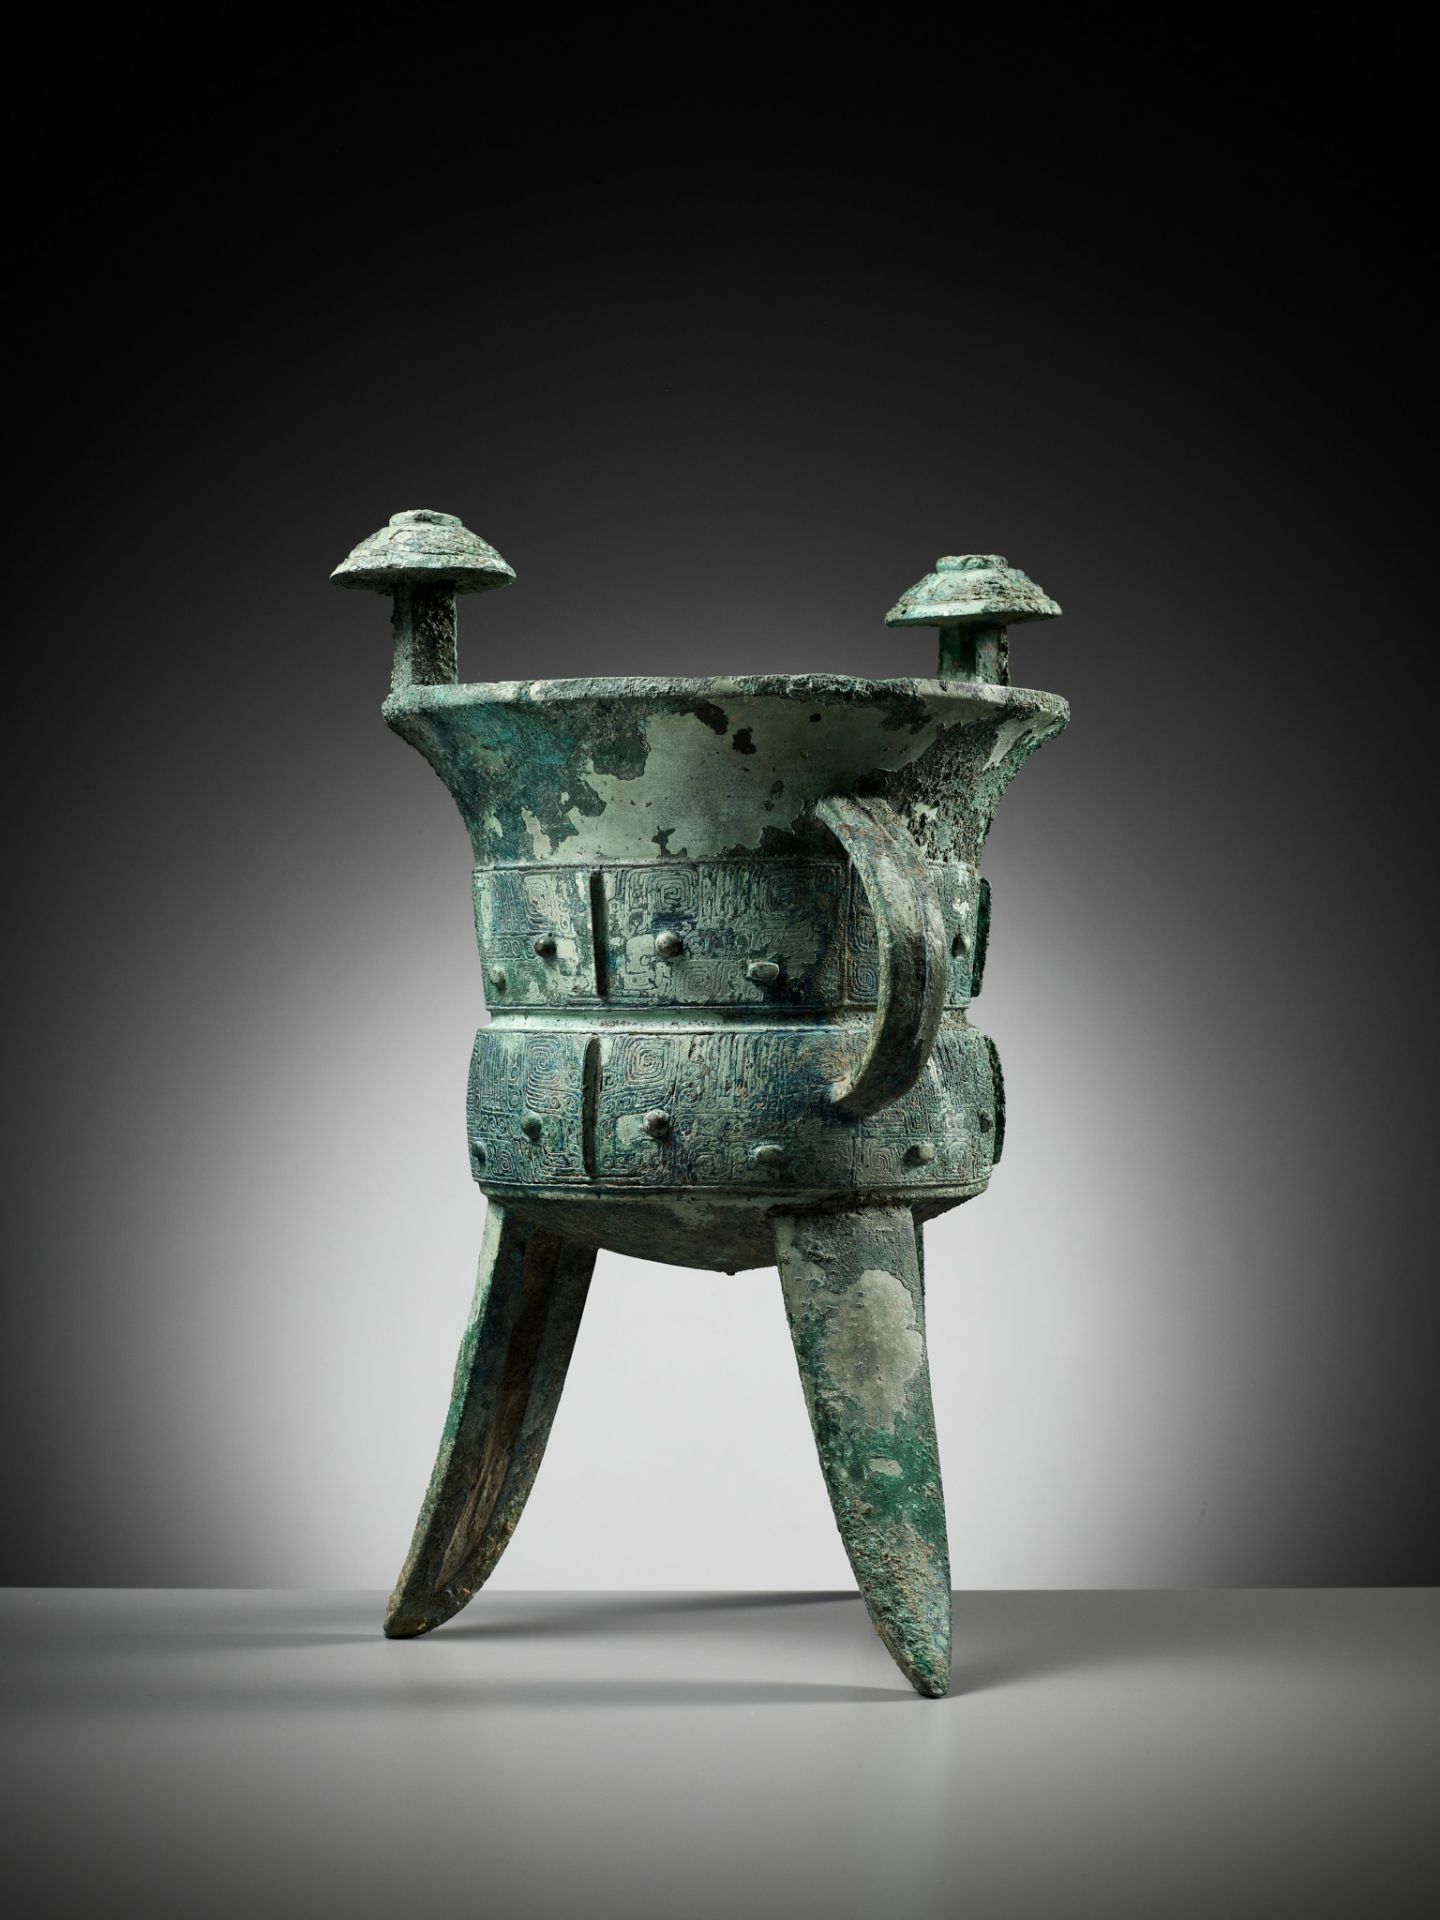 AN EXCEPTIONALLY LARGE AND MASSIVE BRONZE RITUAL TRIPOD WINE VESSEL, JIA, WITH A CLAN MARK, SHANG - Image 15 of 29